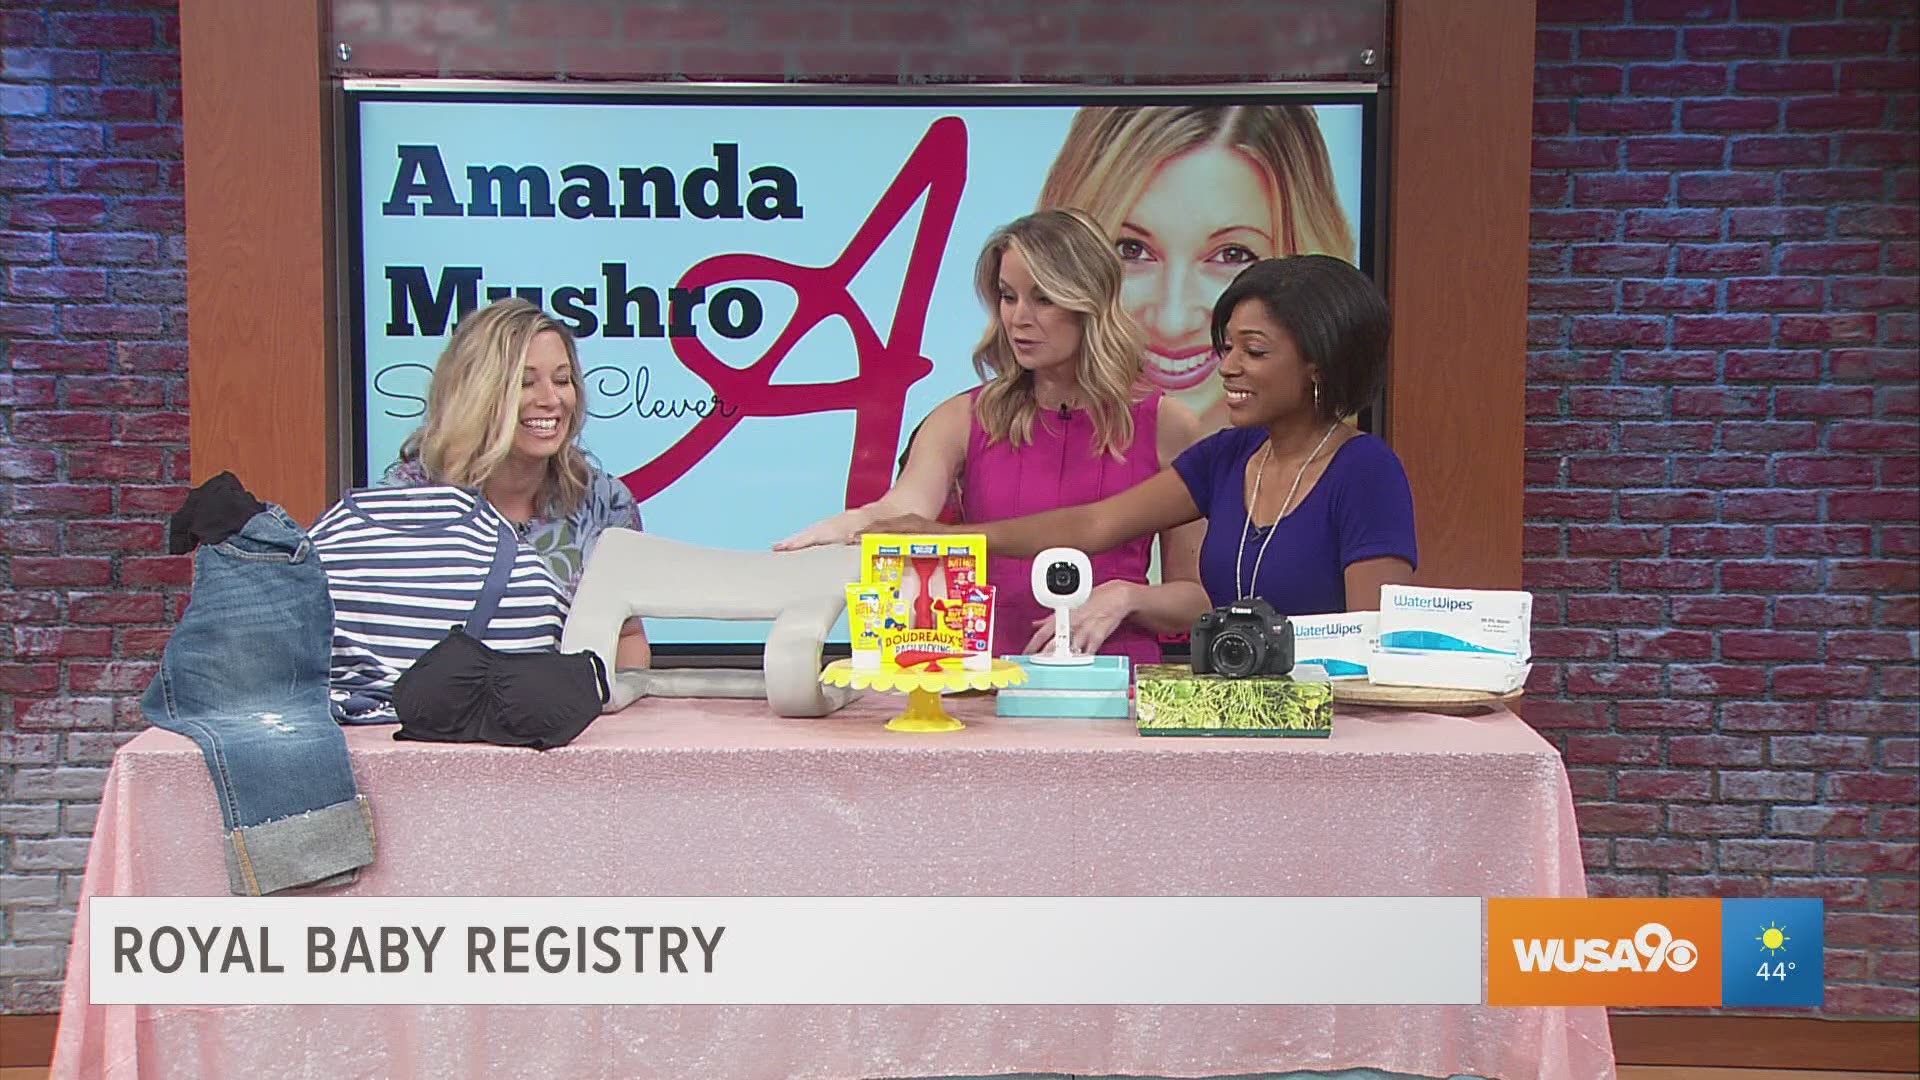 From smart baby cams, to fashionable maternity wear and handy cleanup items... Mommy Blogger Amanda Mushro shares six amazing gifts to give at the next baby shower you attend.